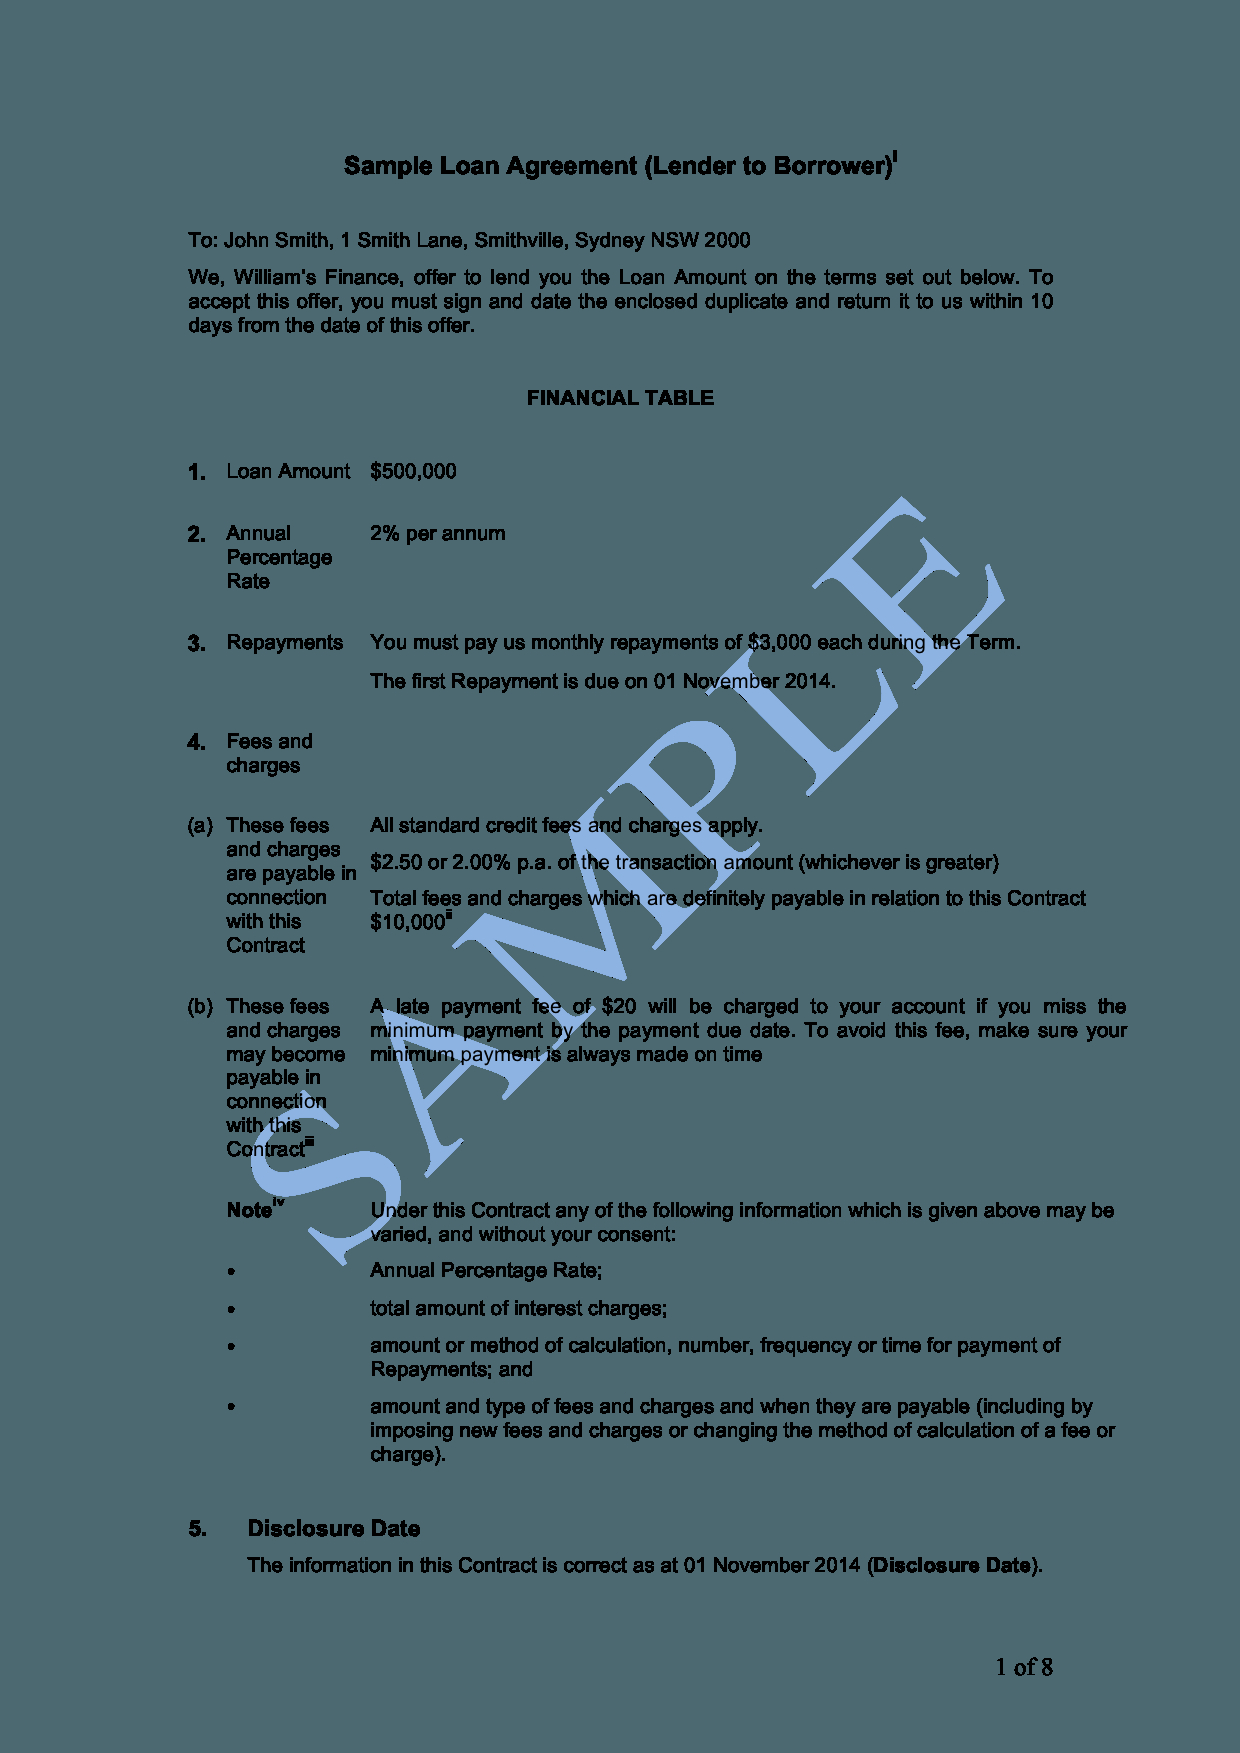 How To Write A Loan Agreement Loan Agreement Lender To Borrower Sample Lawpath